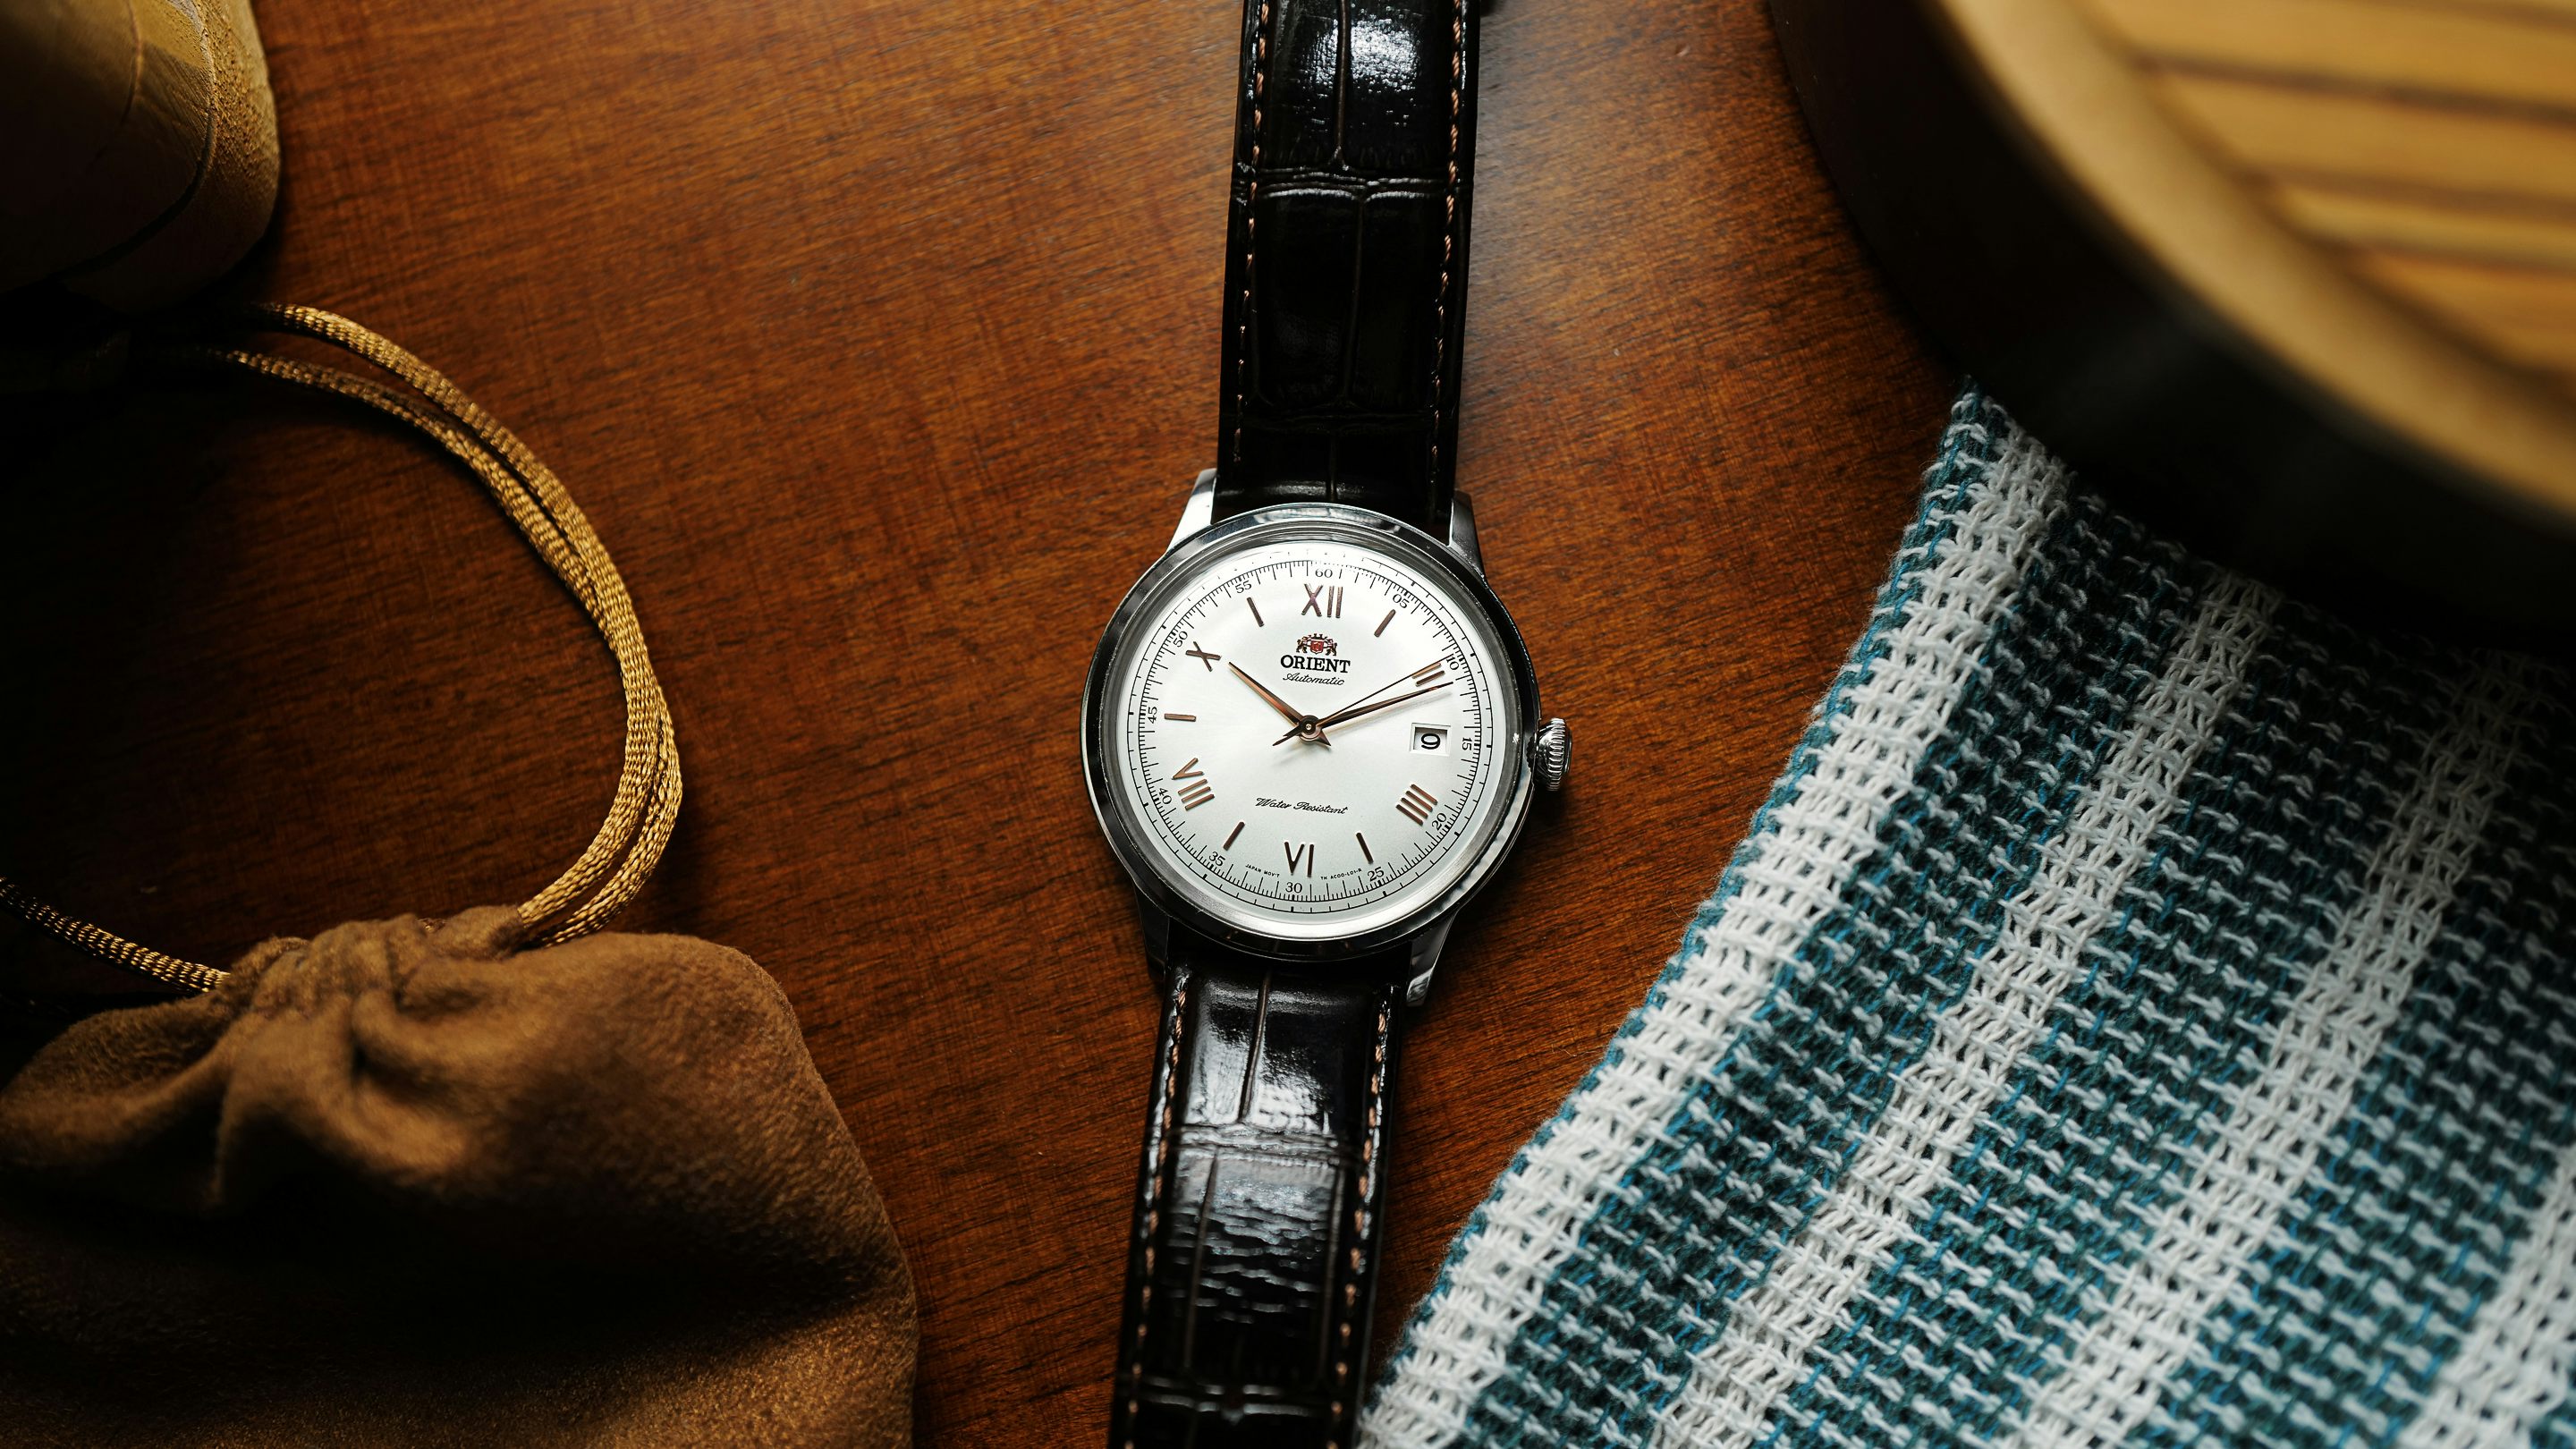 The Best Watch Under $200 Is The Orient Bambino